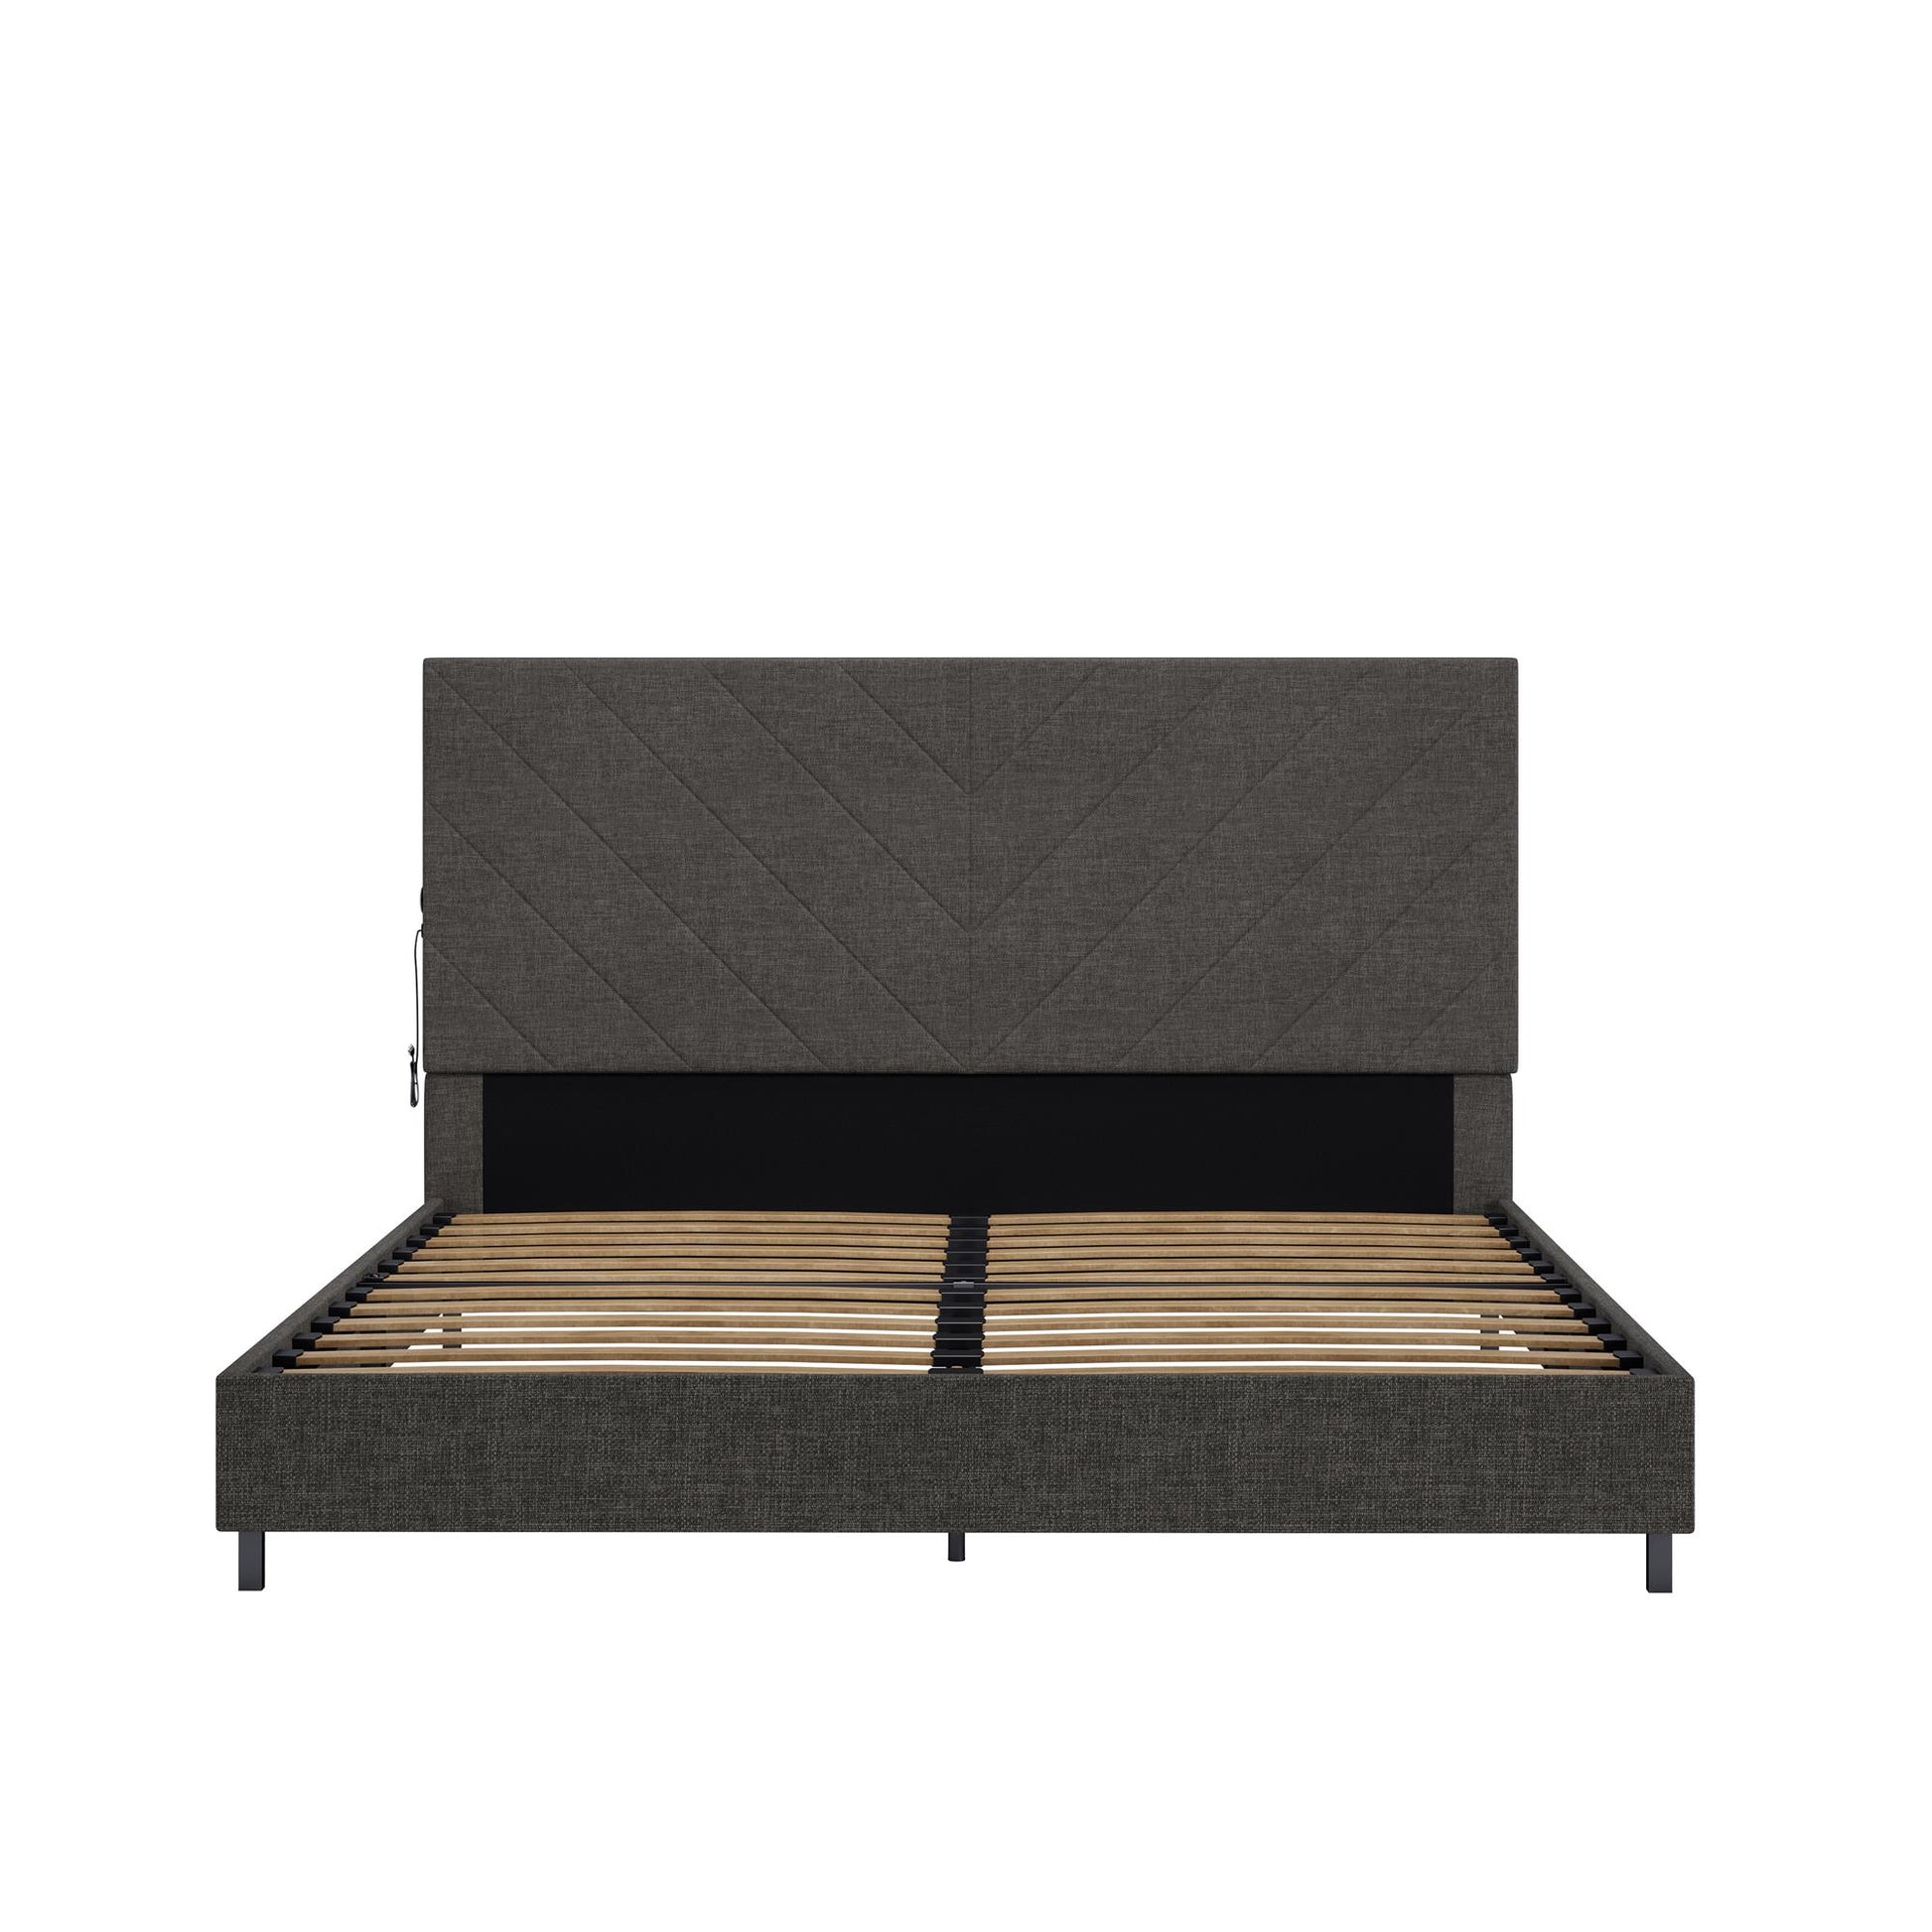 Paxson Upholstered Bed with USB Port and Wood Slats - Gray - Queen